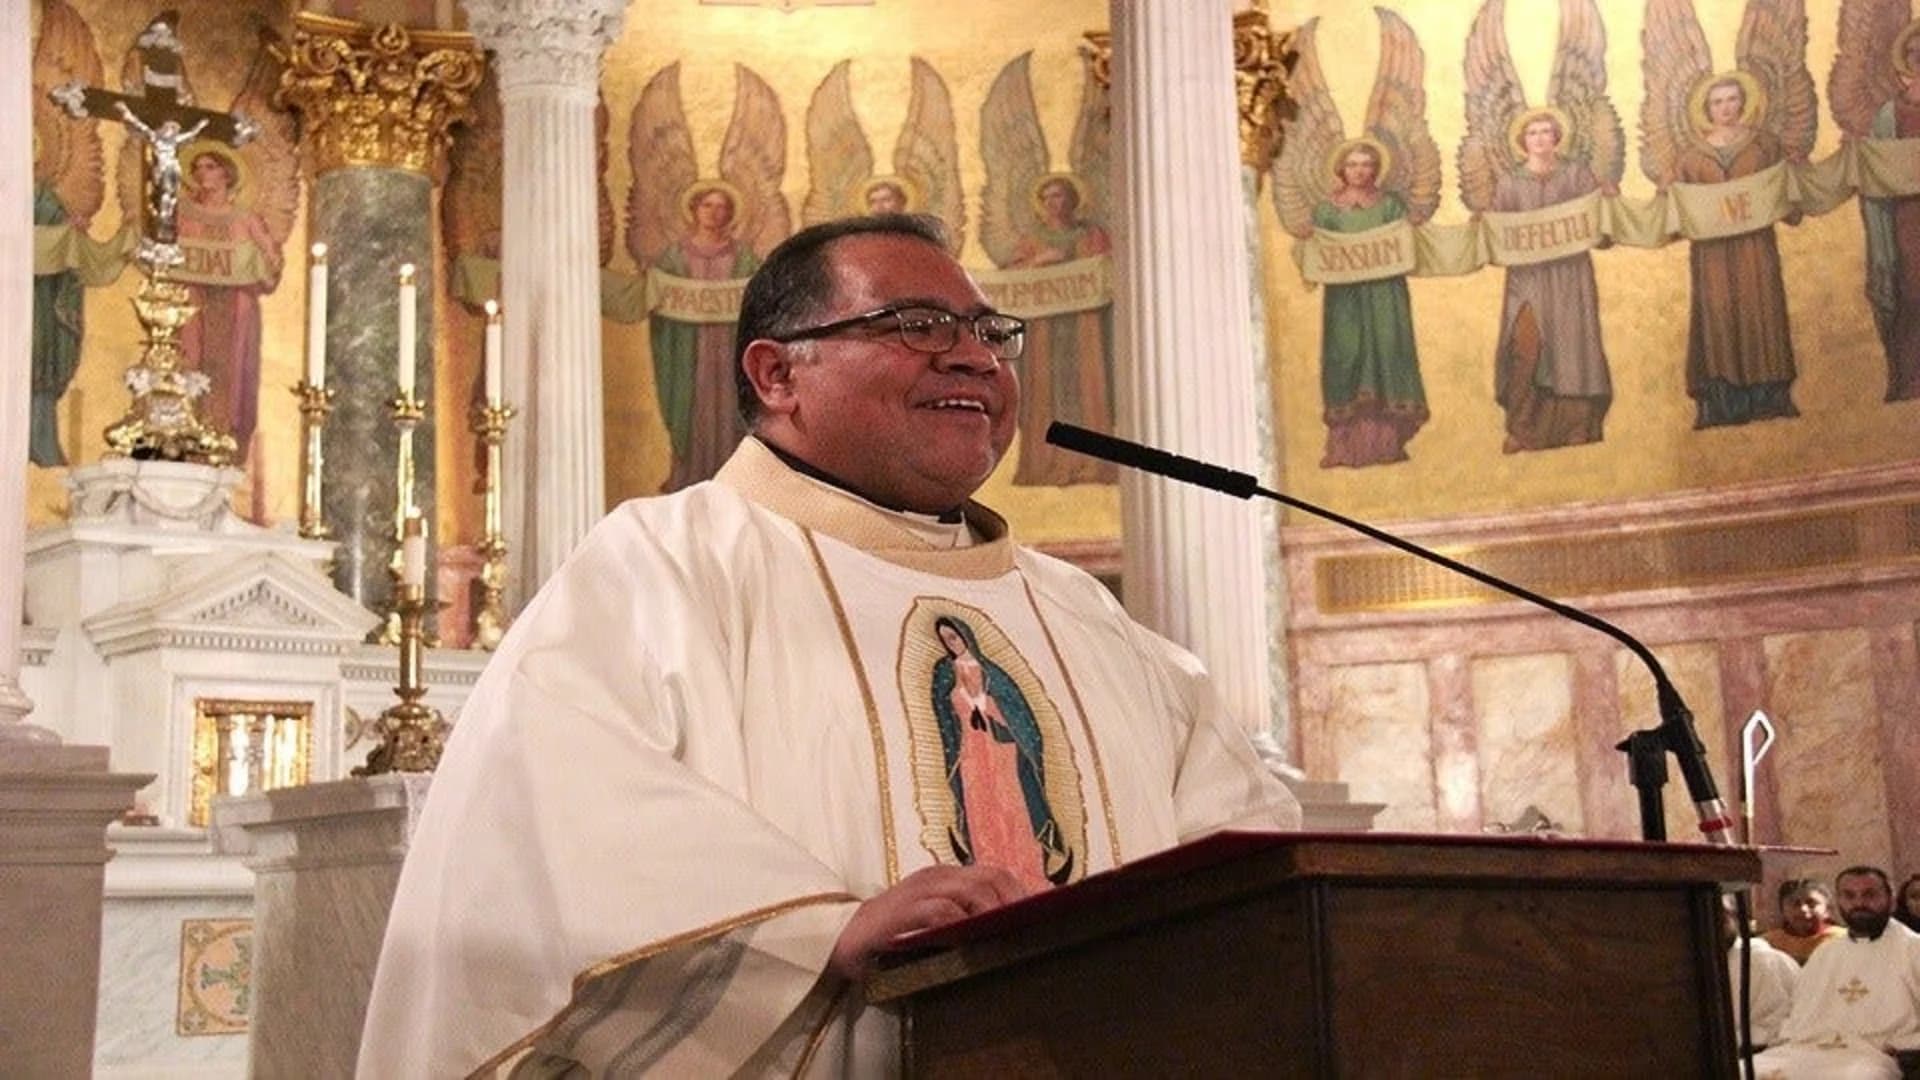 Diocese of Brooklyn announces death of Wyckoff Heights pastor due to coronavirus